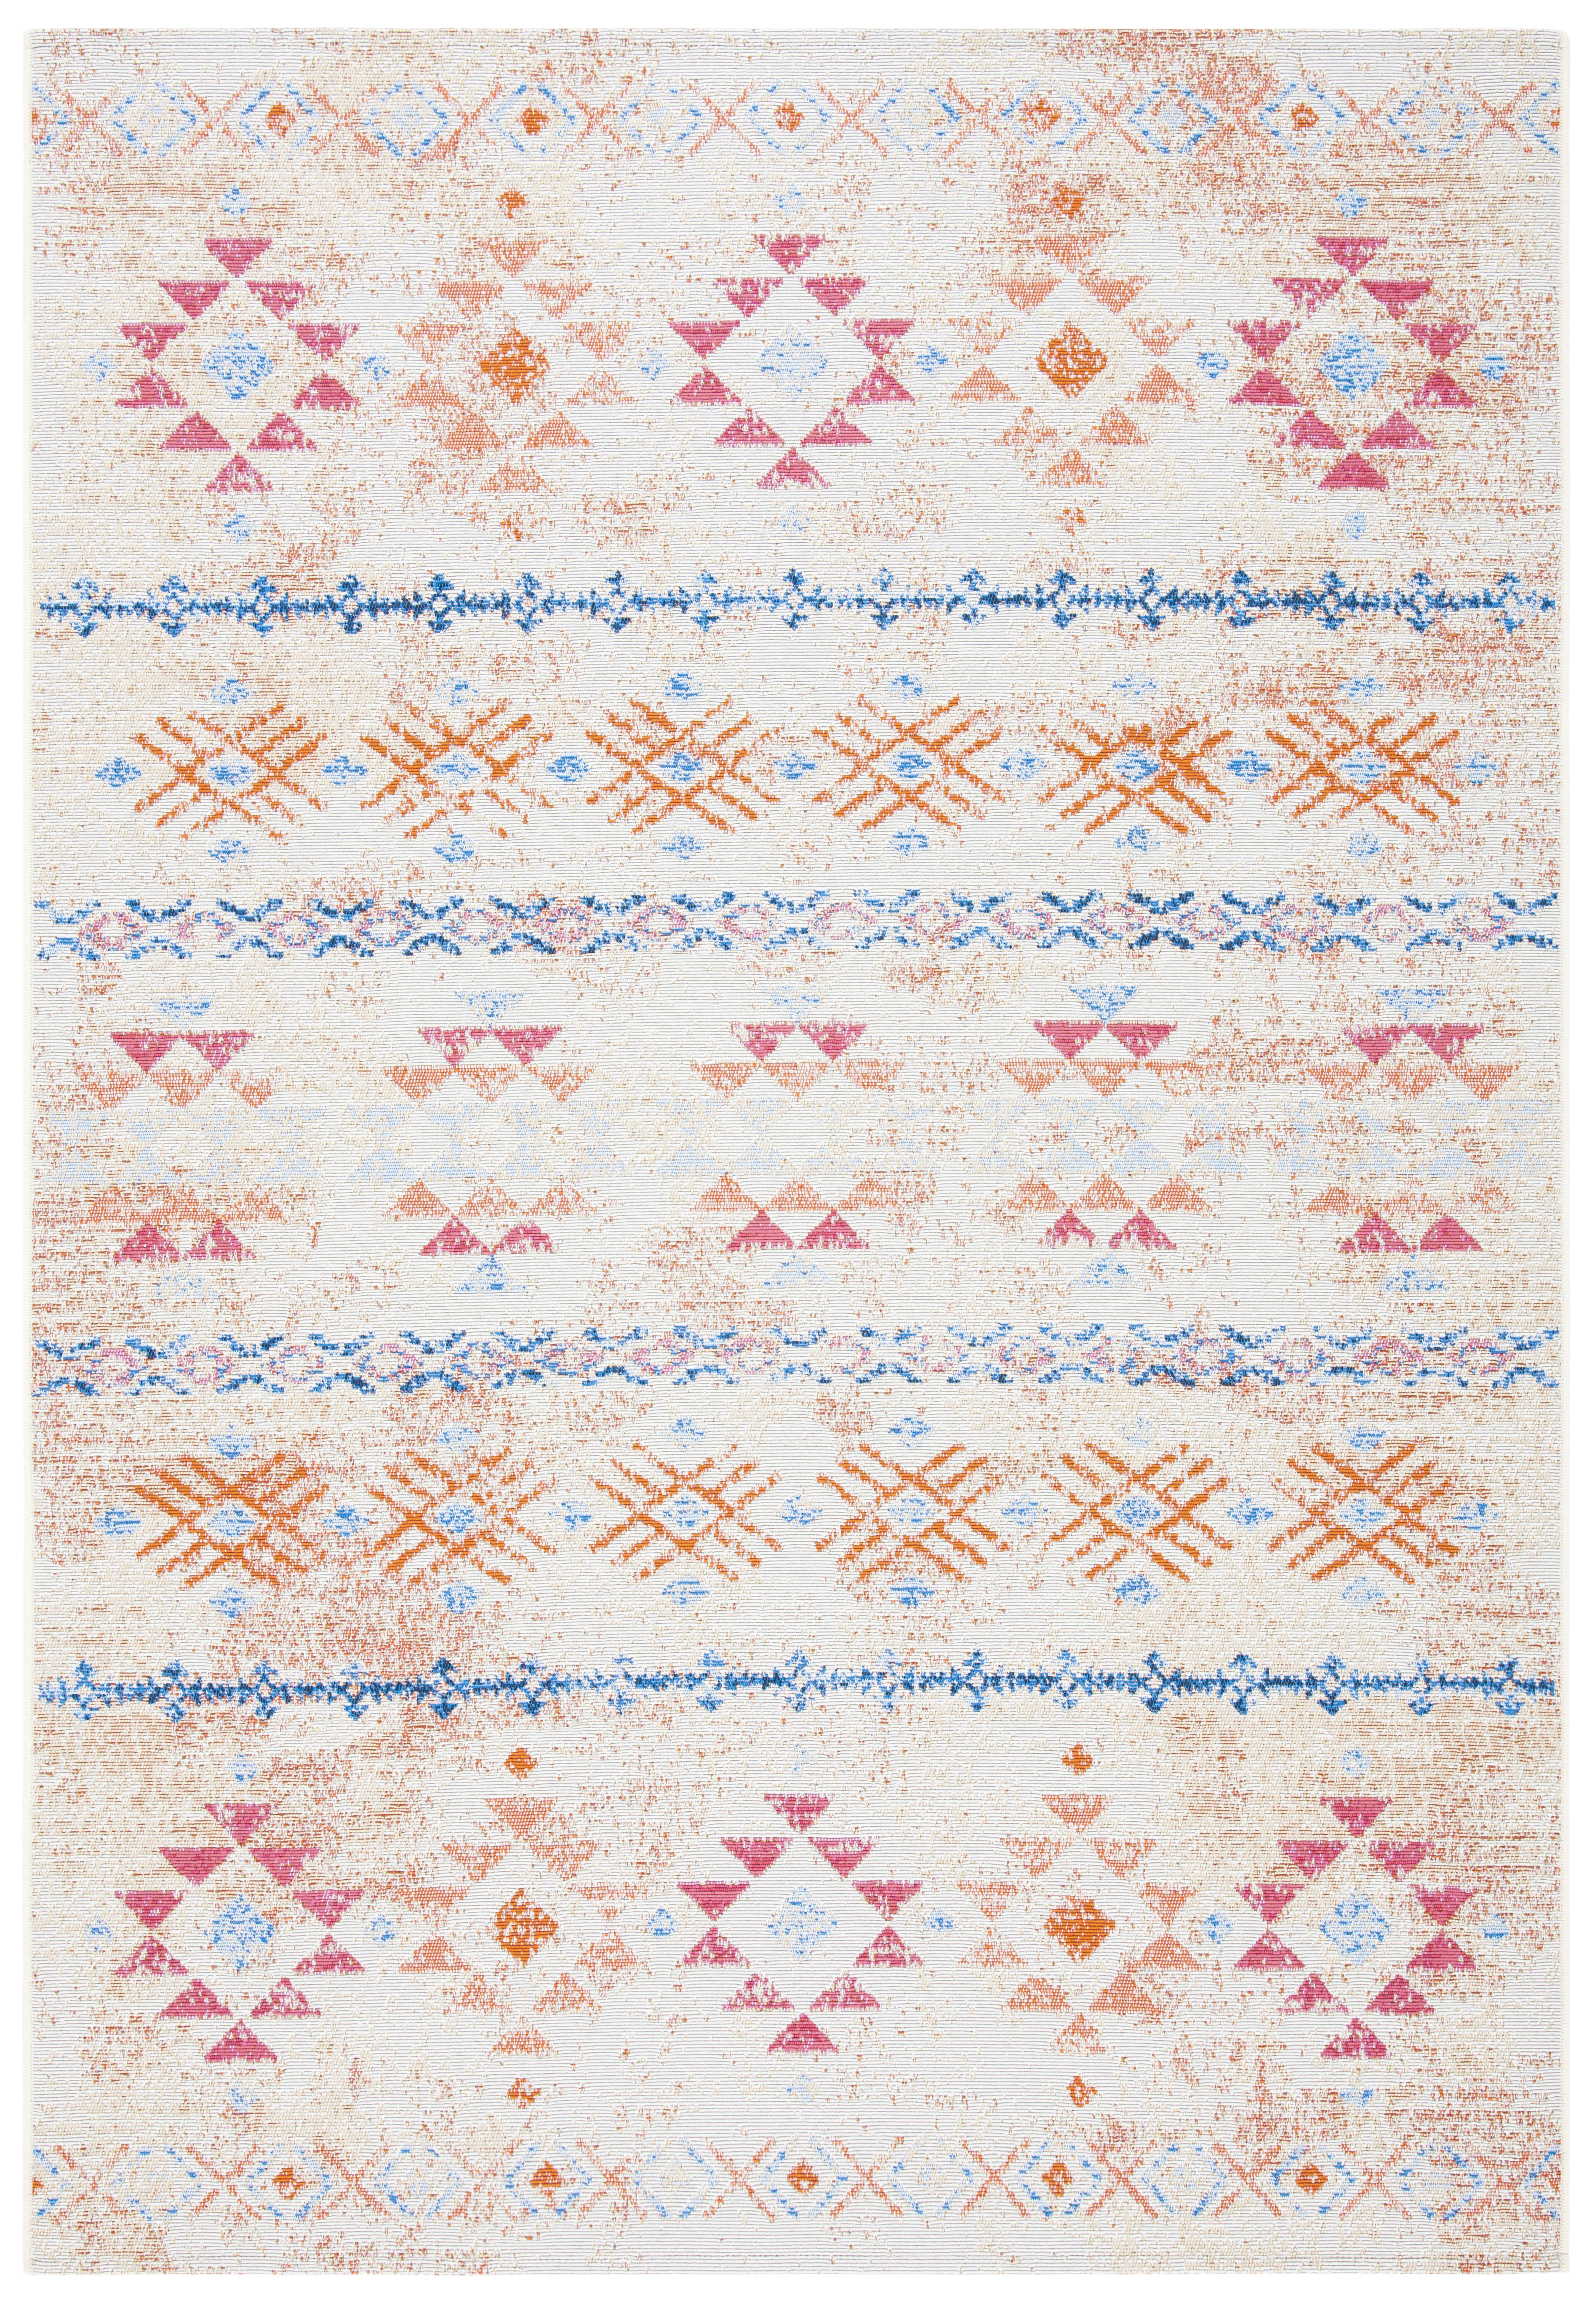 Safavieh Summer Donella Outdoor Boho Distressed Area Rug, Ivory/Red, 5'3" x 7'6" - image 2 of 6